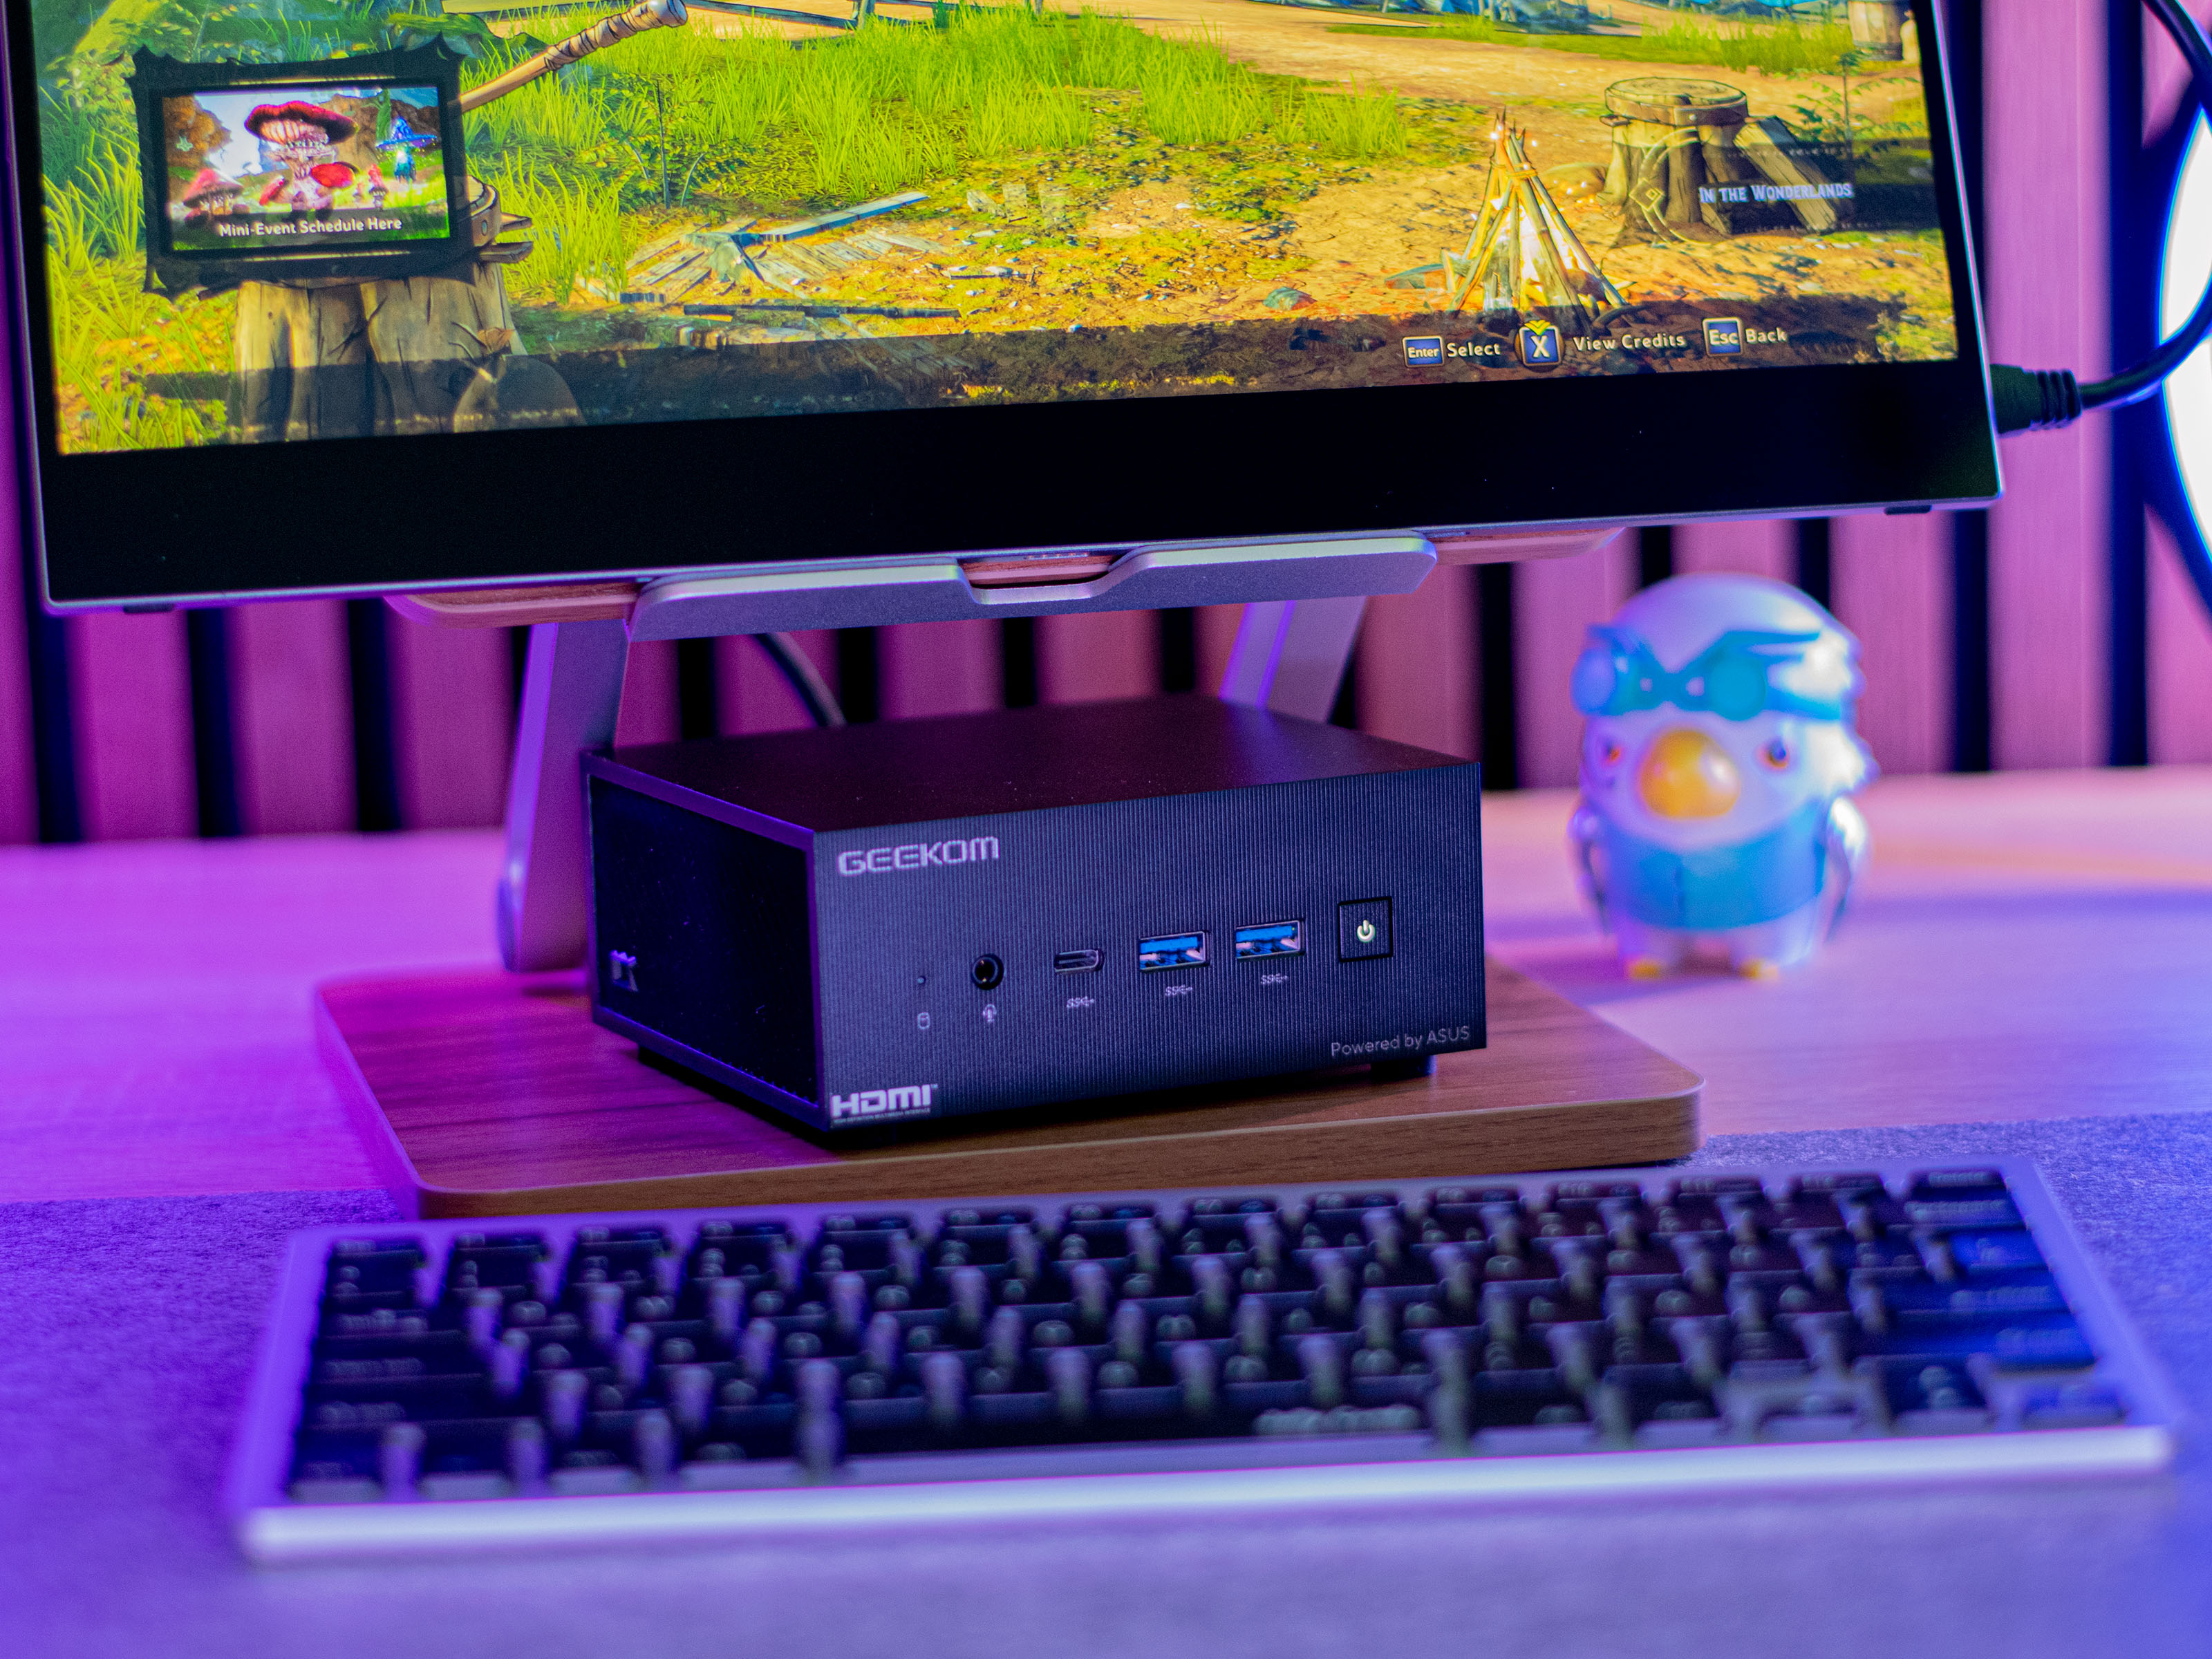 Geekom A5 review: Noble mini PC with AMD power